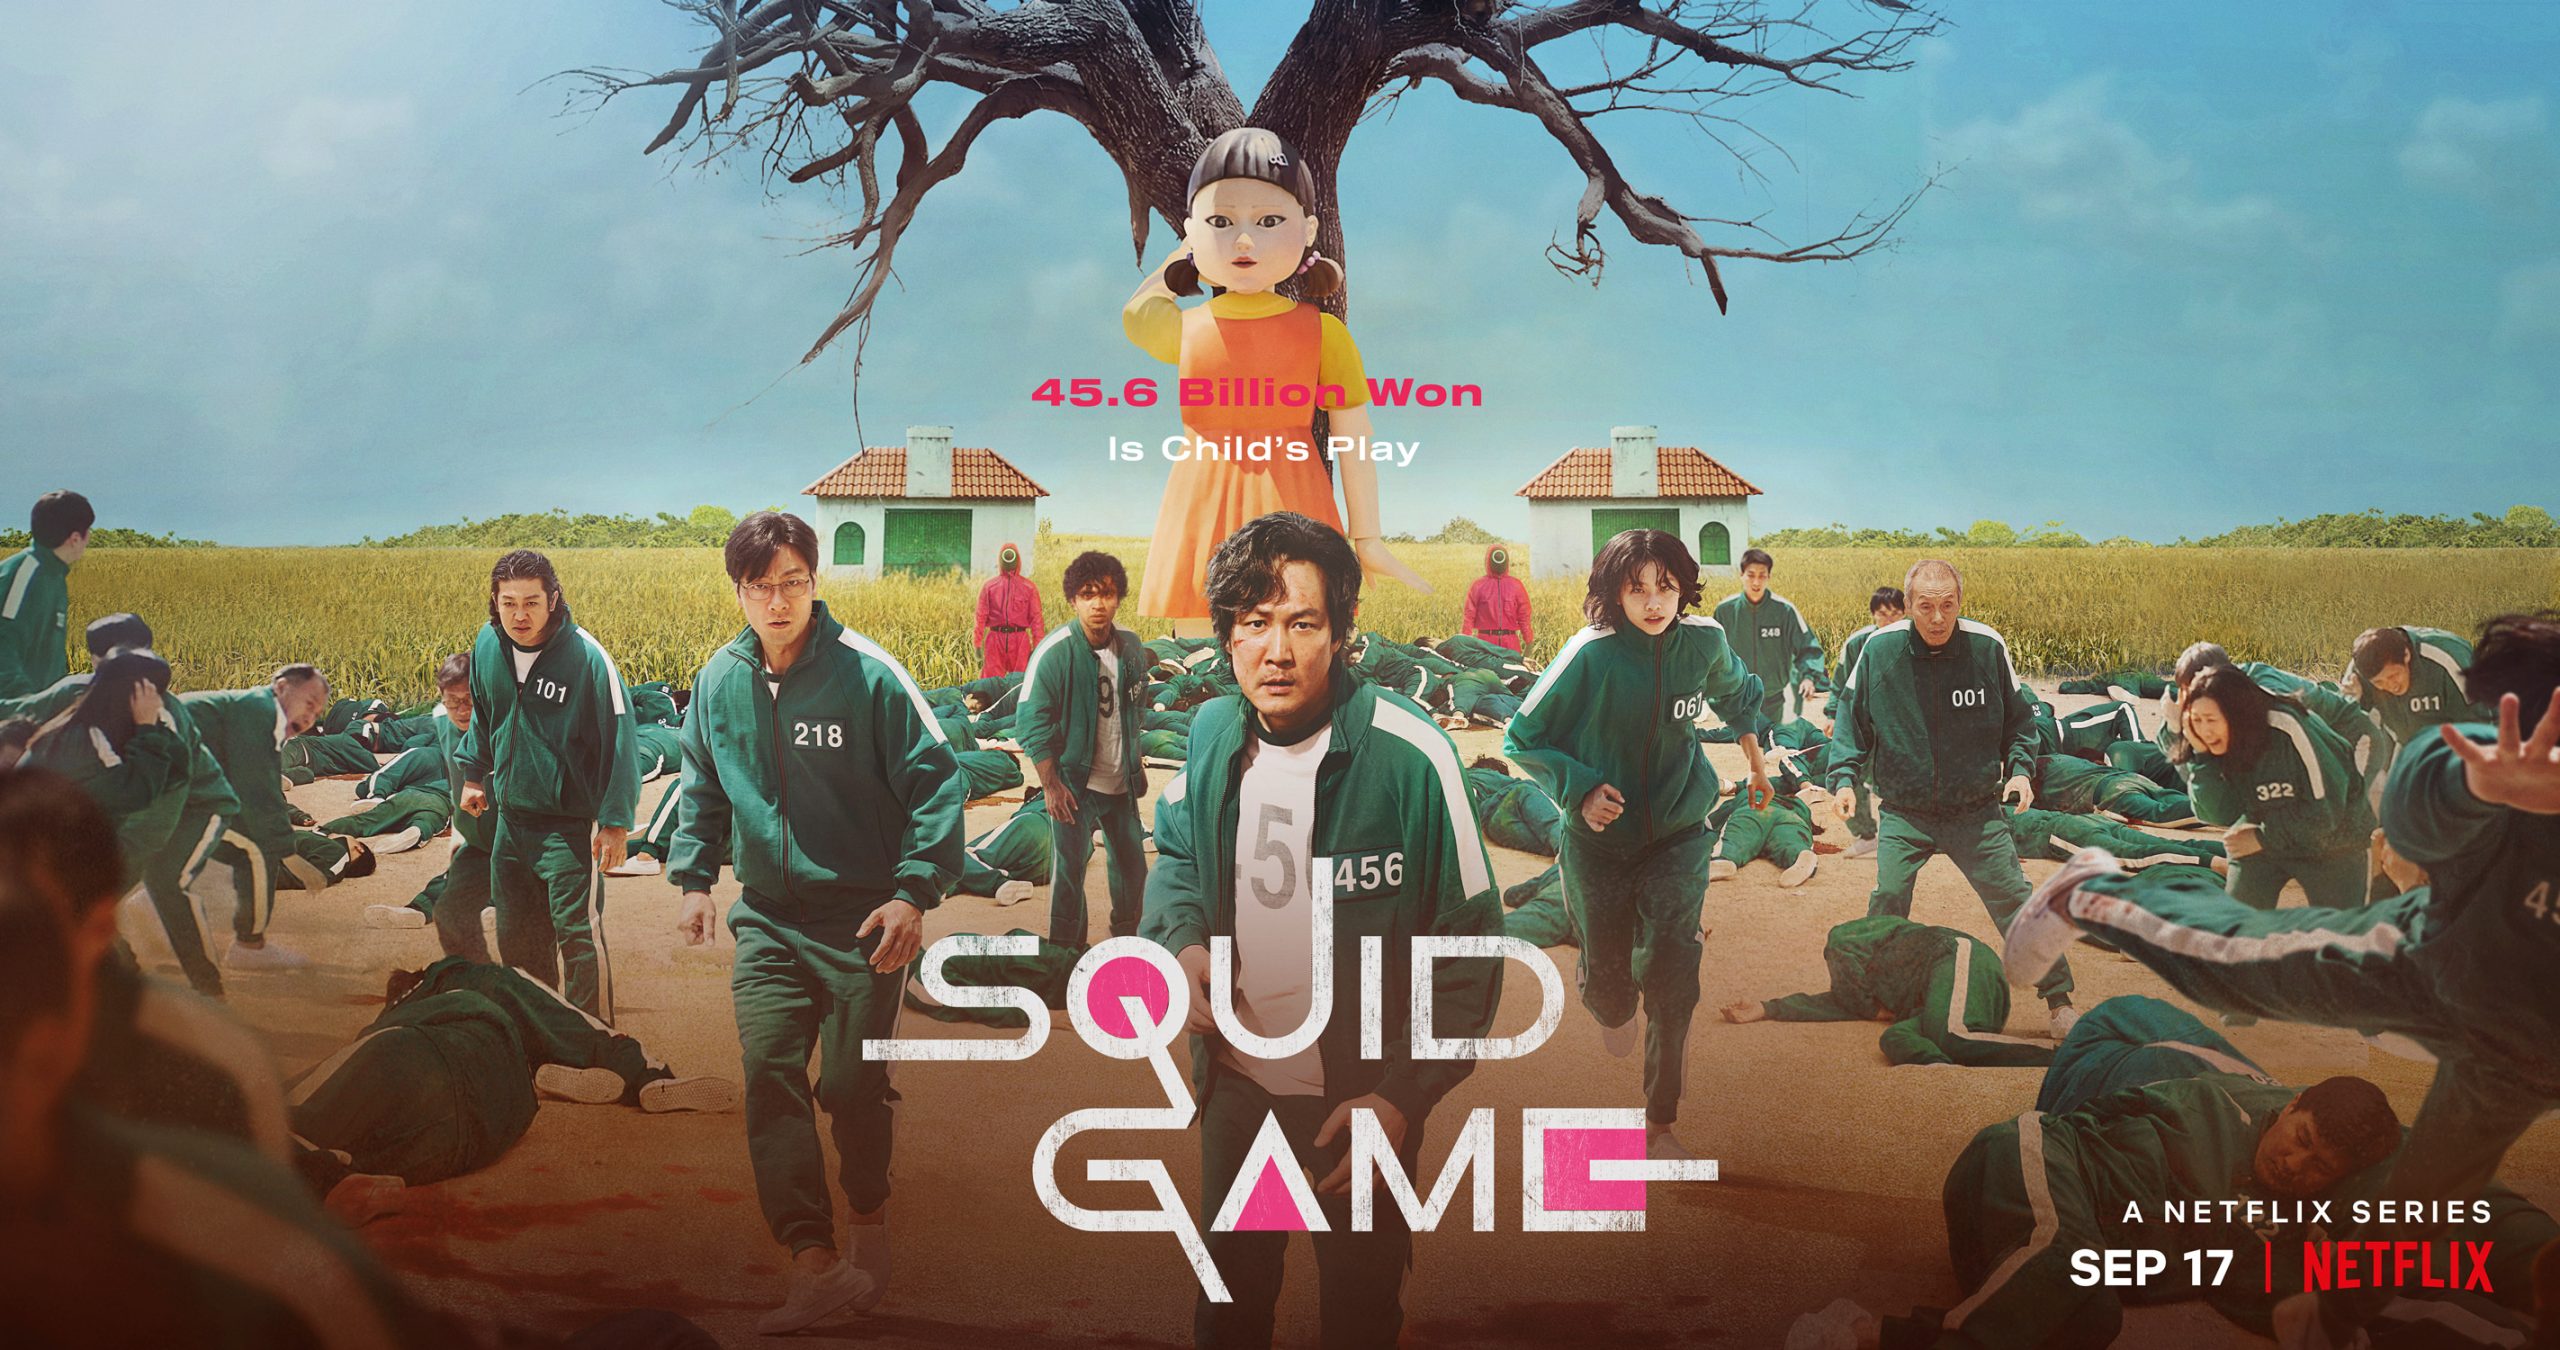 Netflix's Squid Game. Official poster.